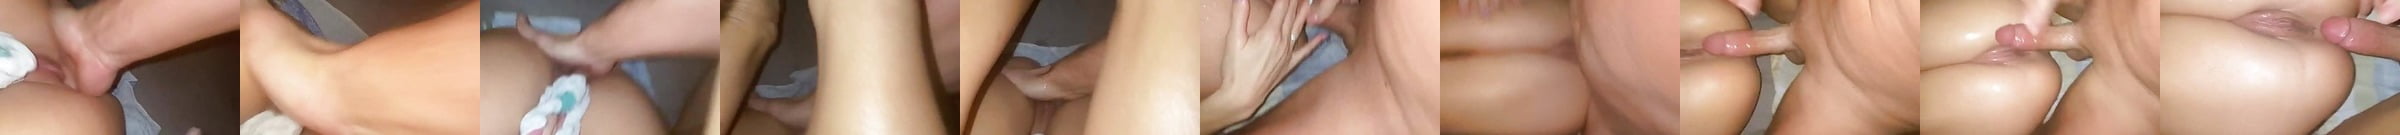 My Sexy Wife Squirting Hard On My Cock Porn 34 Xhamster Xhamster